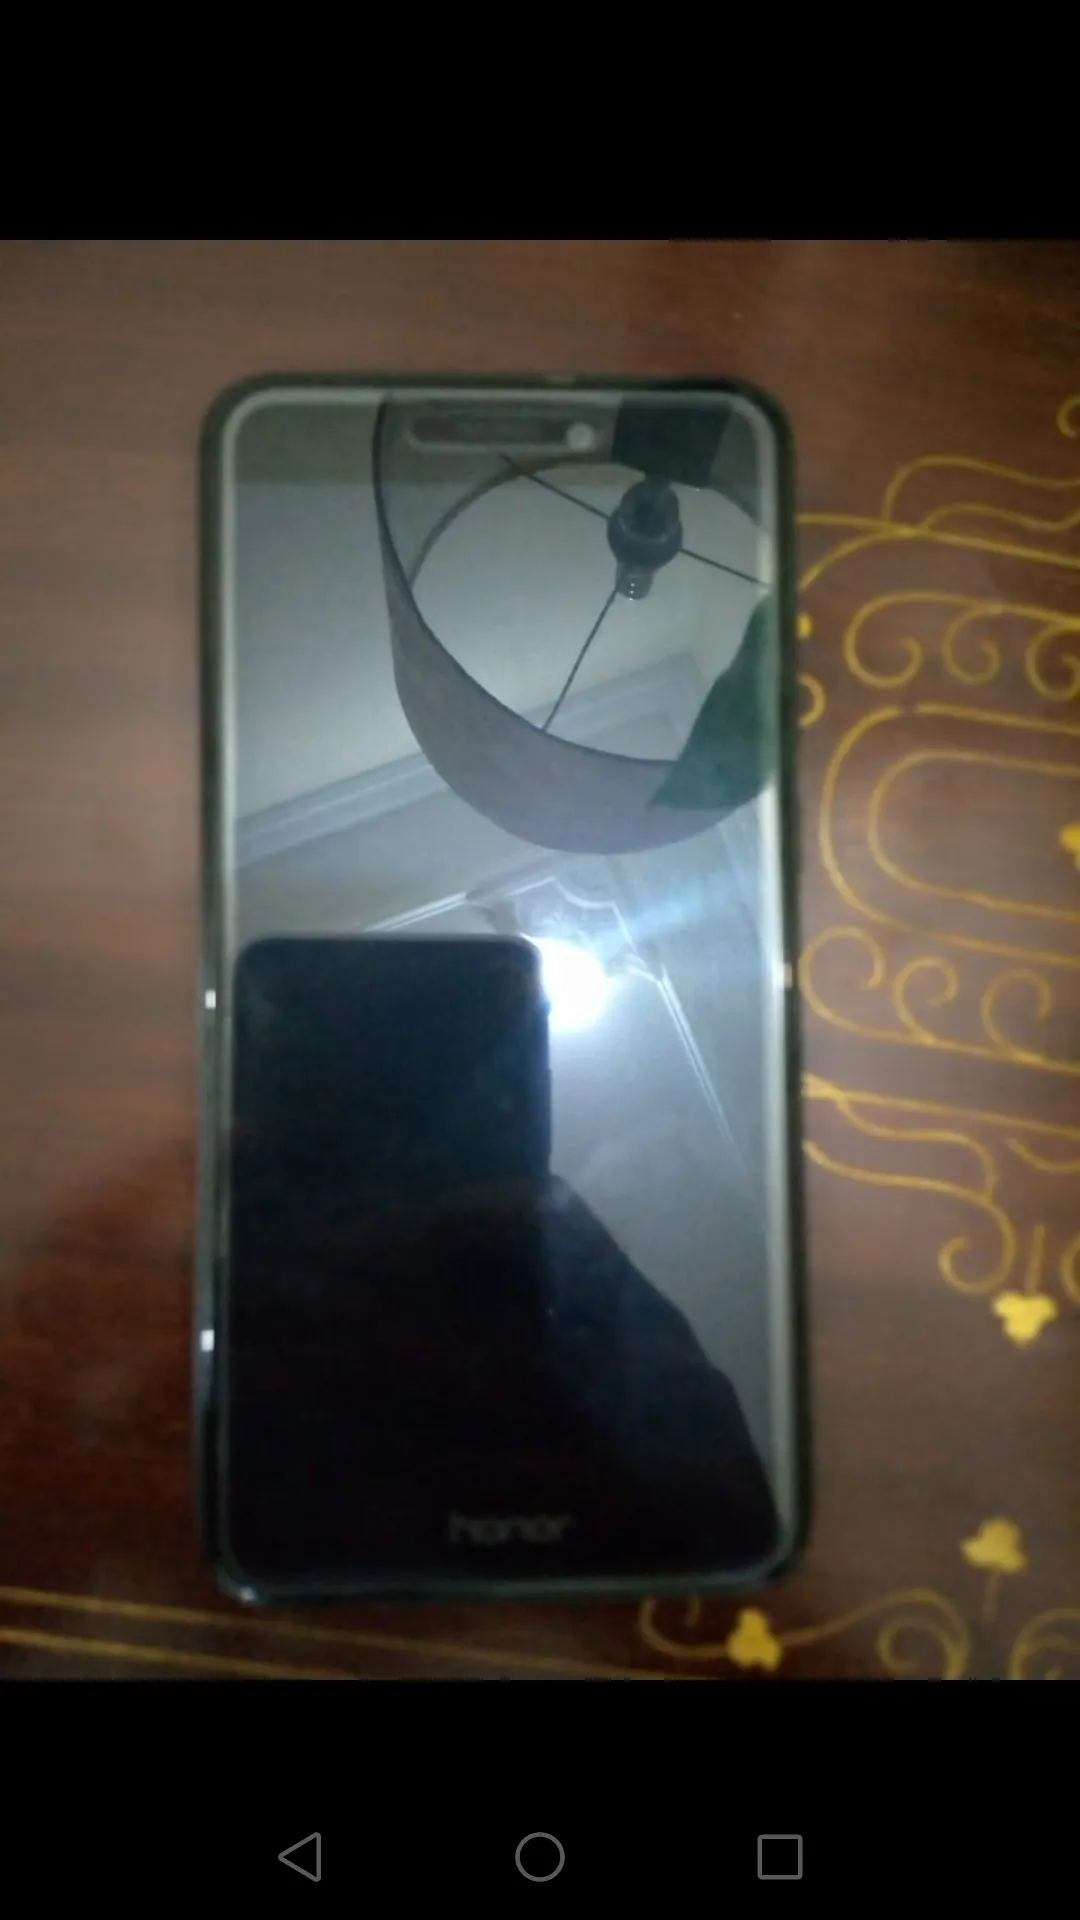 Huawei Honor 8 Lite for sale in perfect working condition - photo 1